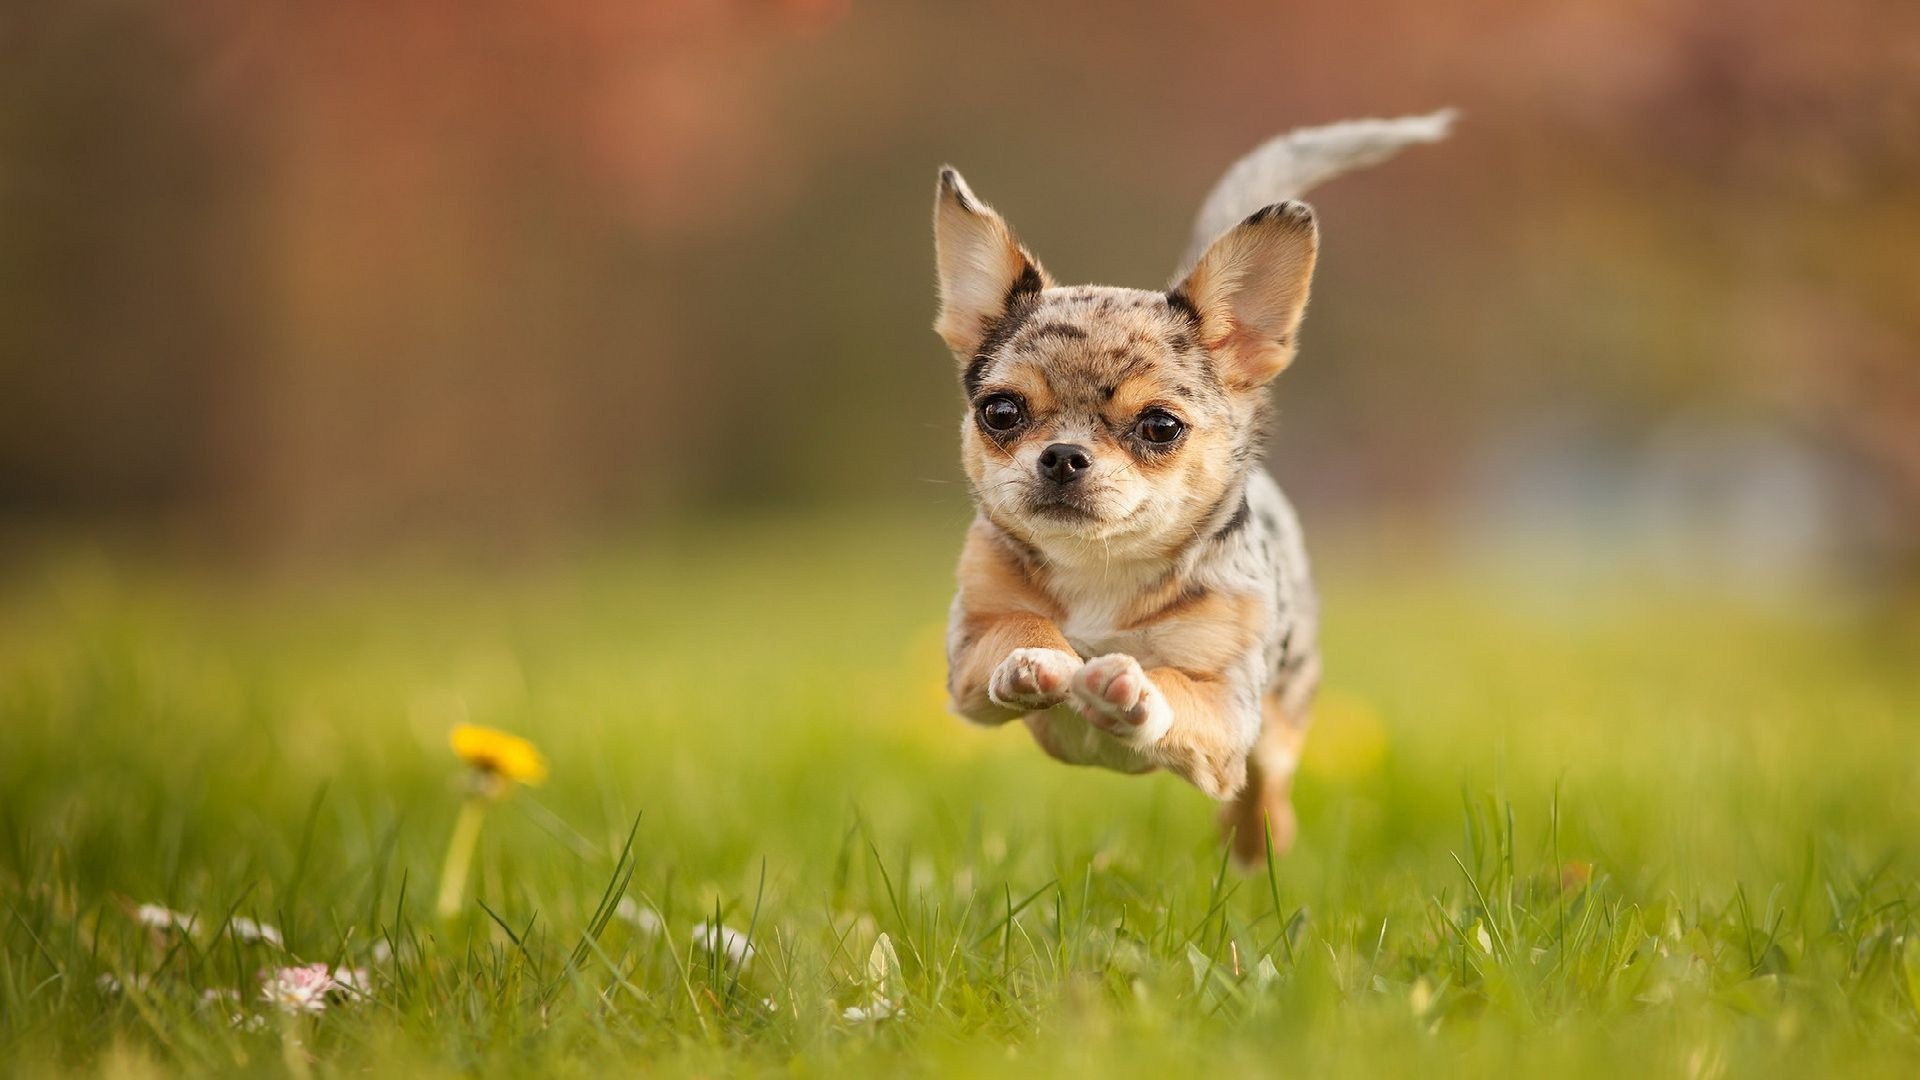 Chihuahua wallpapers, Dog lovers' choice, Cute and tiny, Adorable pets, 1920x1080 Full HD Desktop